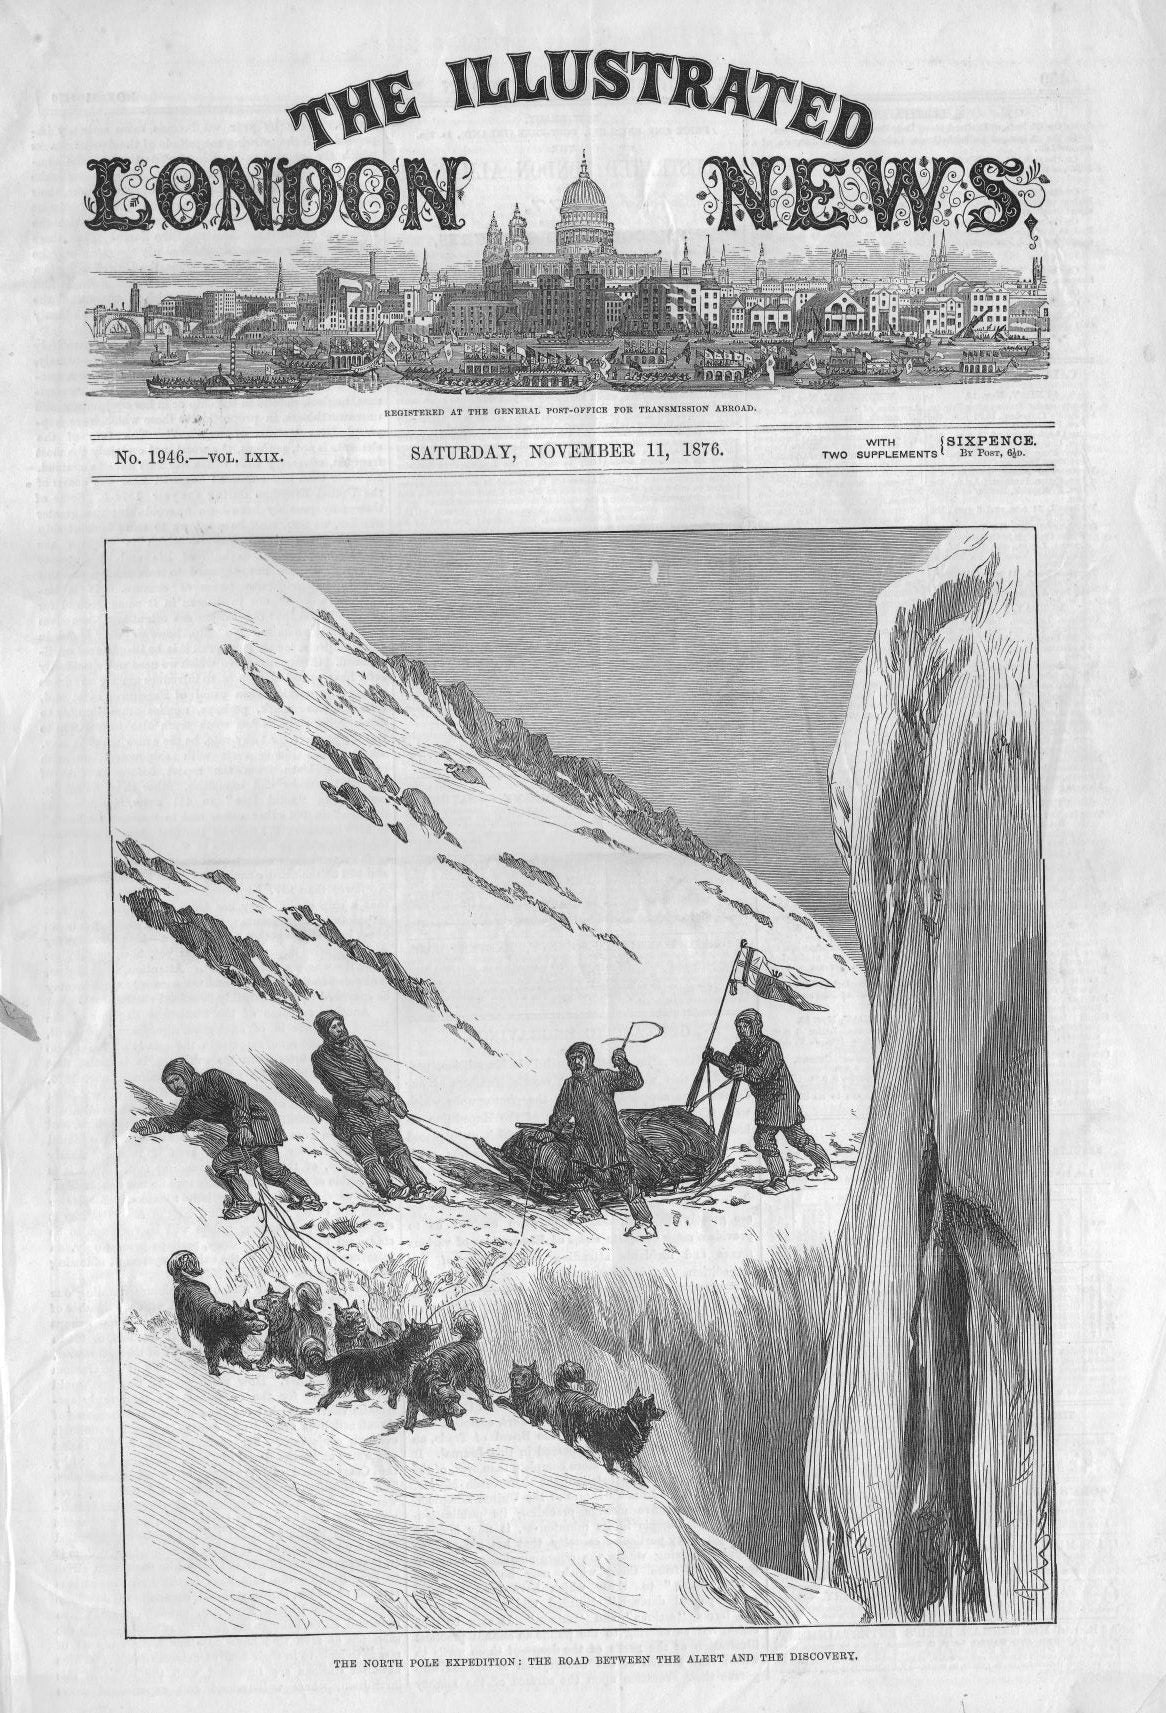 North Pole attempt British Arctic Expedition of 1875–1876